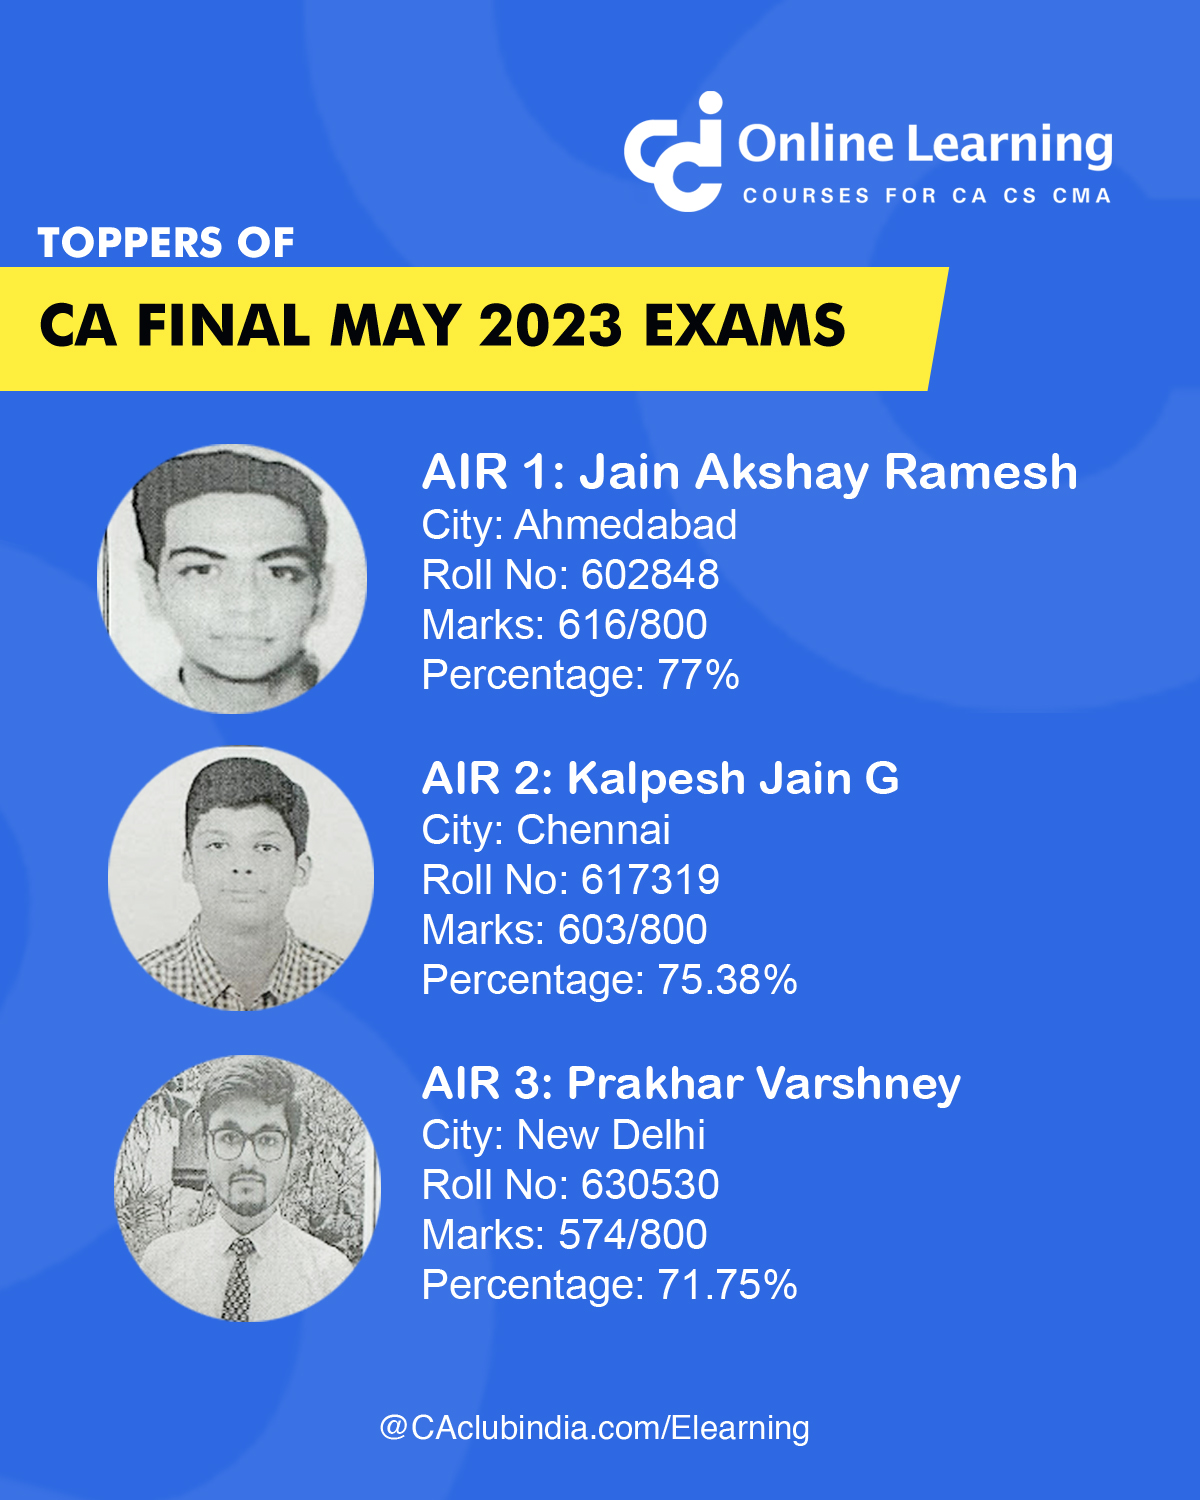 Toppers of CA Final Examination held in May 2023